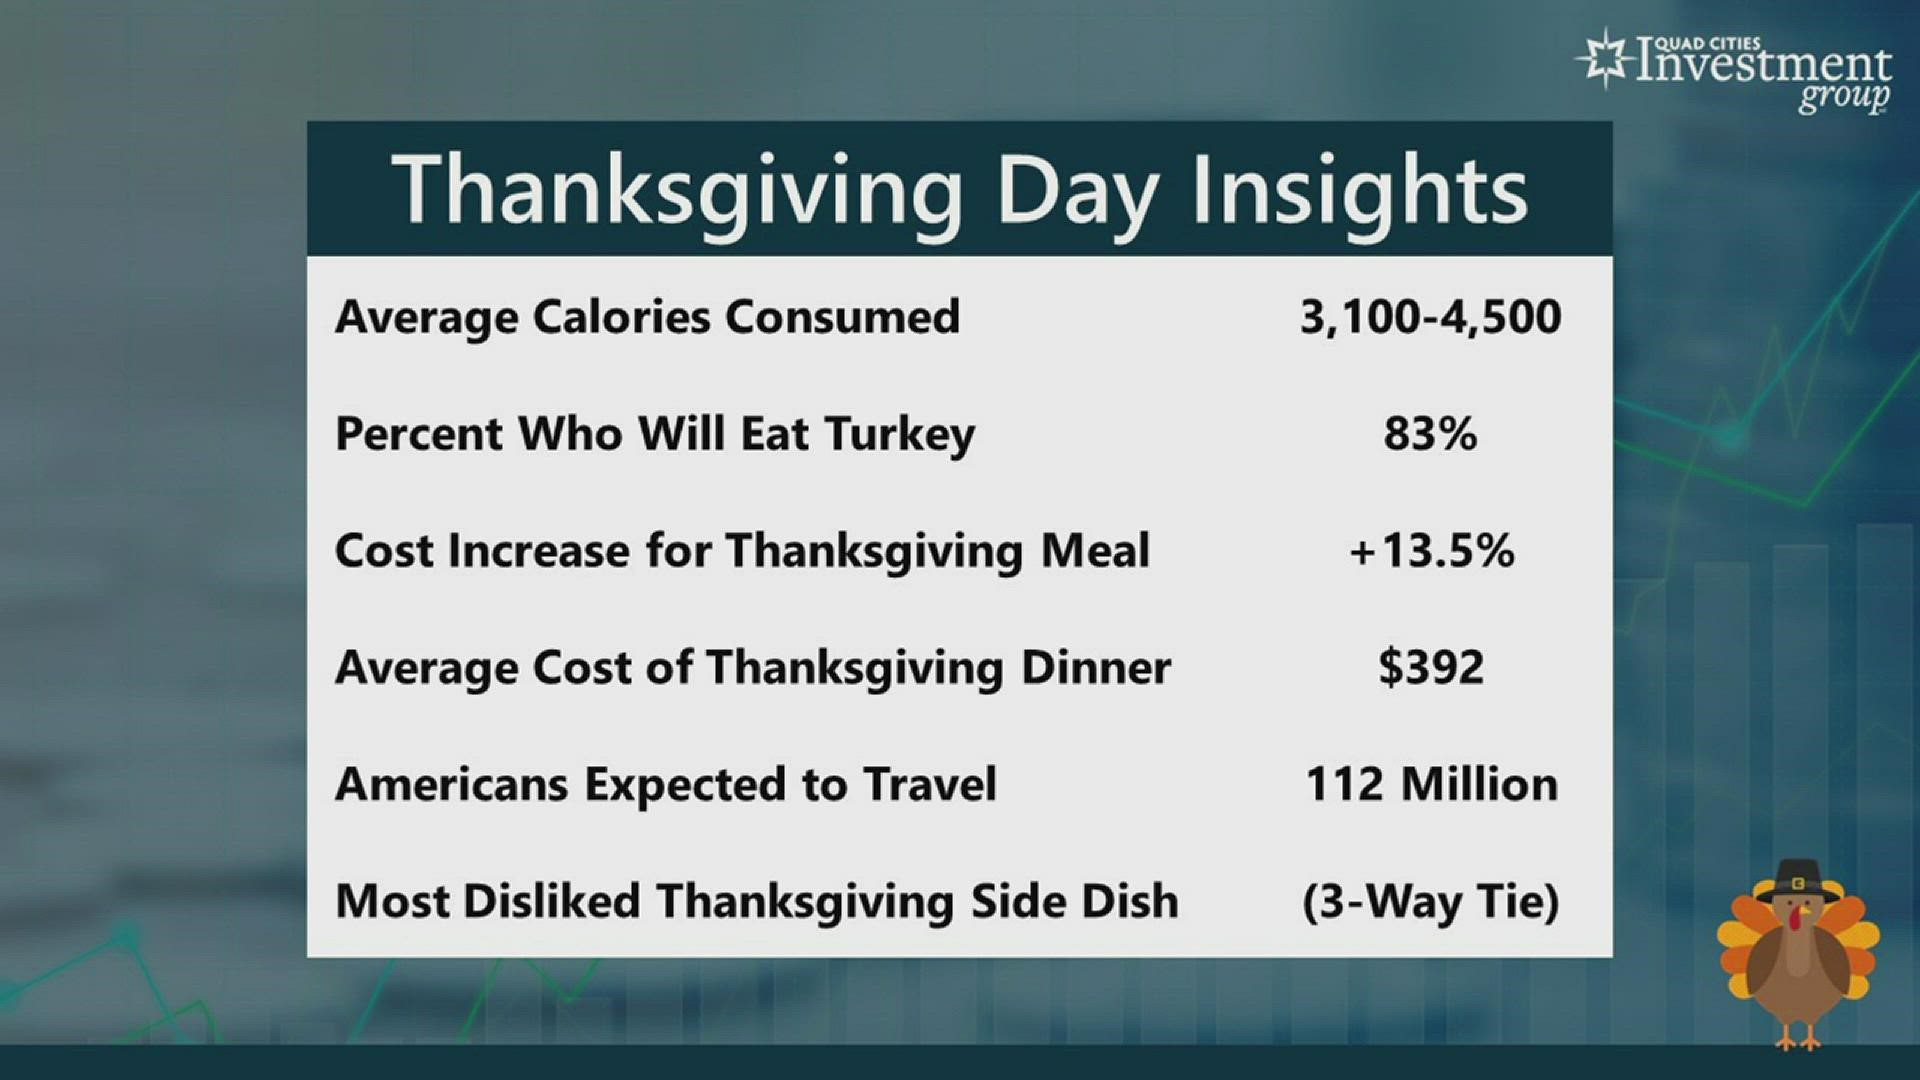 As Americans prepare to give thanks to what’s most important in their lives, we’ll discuss the latest insights into this year’s Thanksgiving holiday celebration.